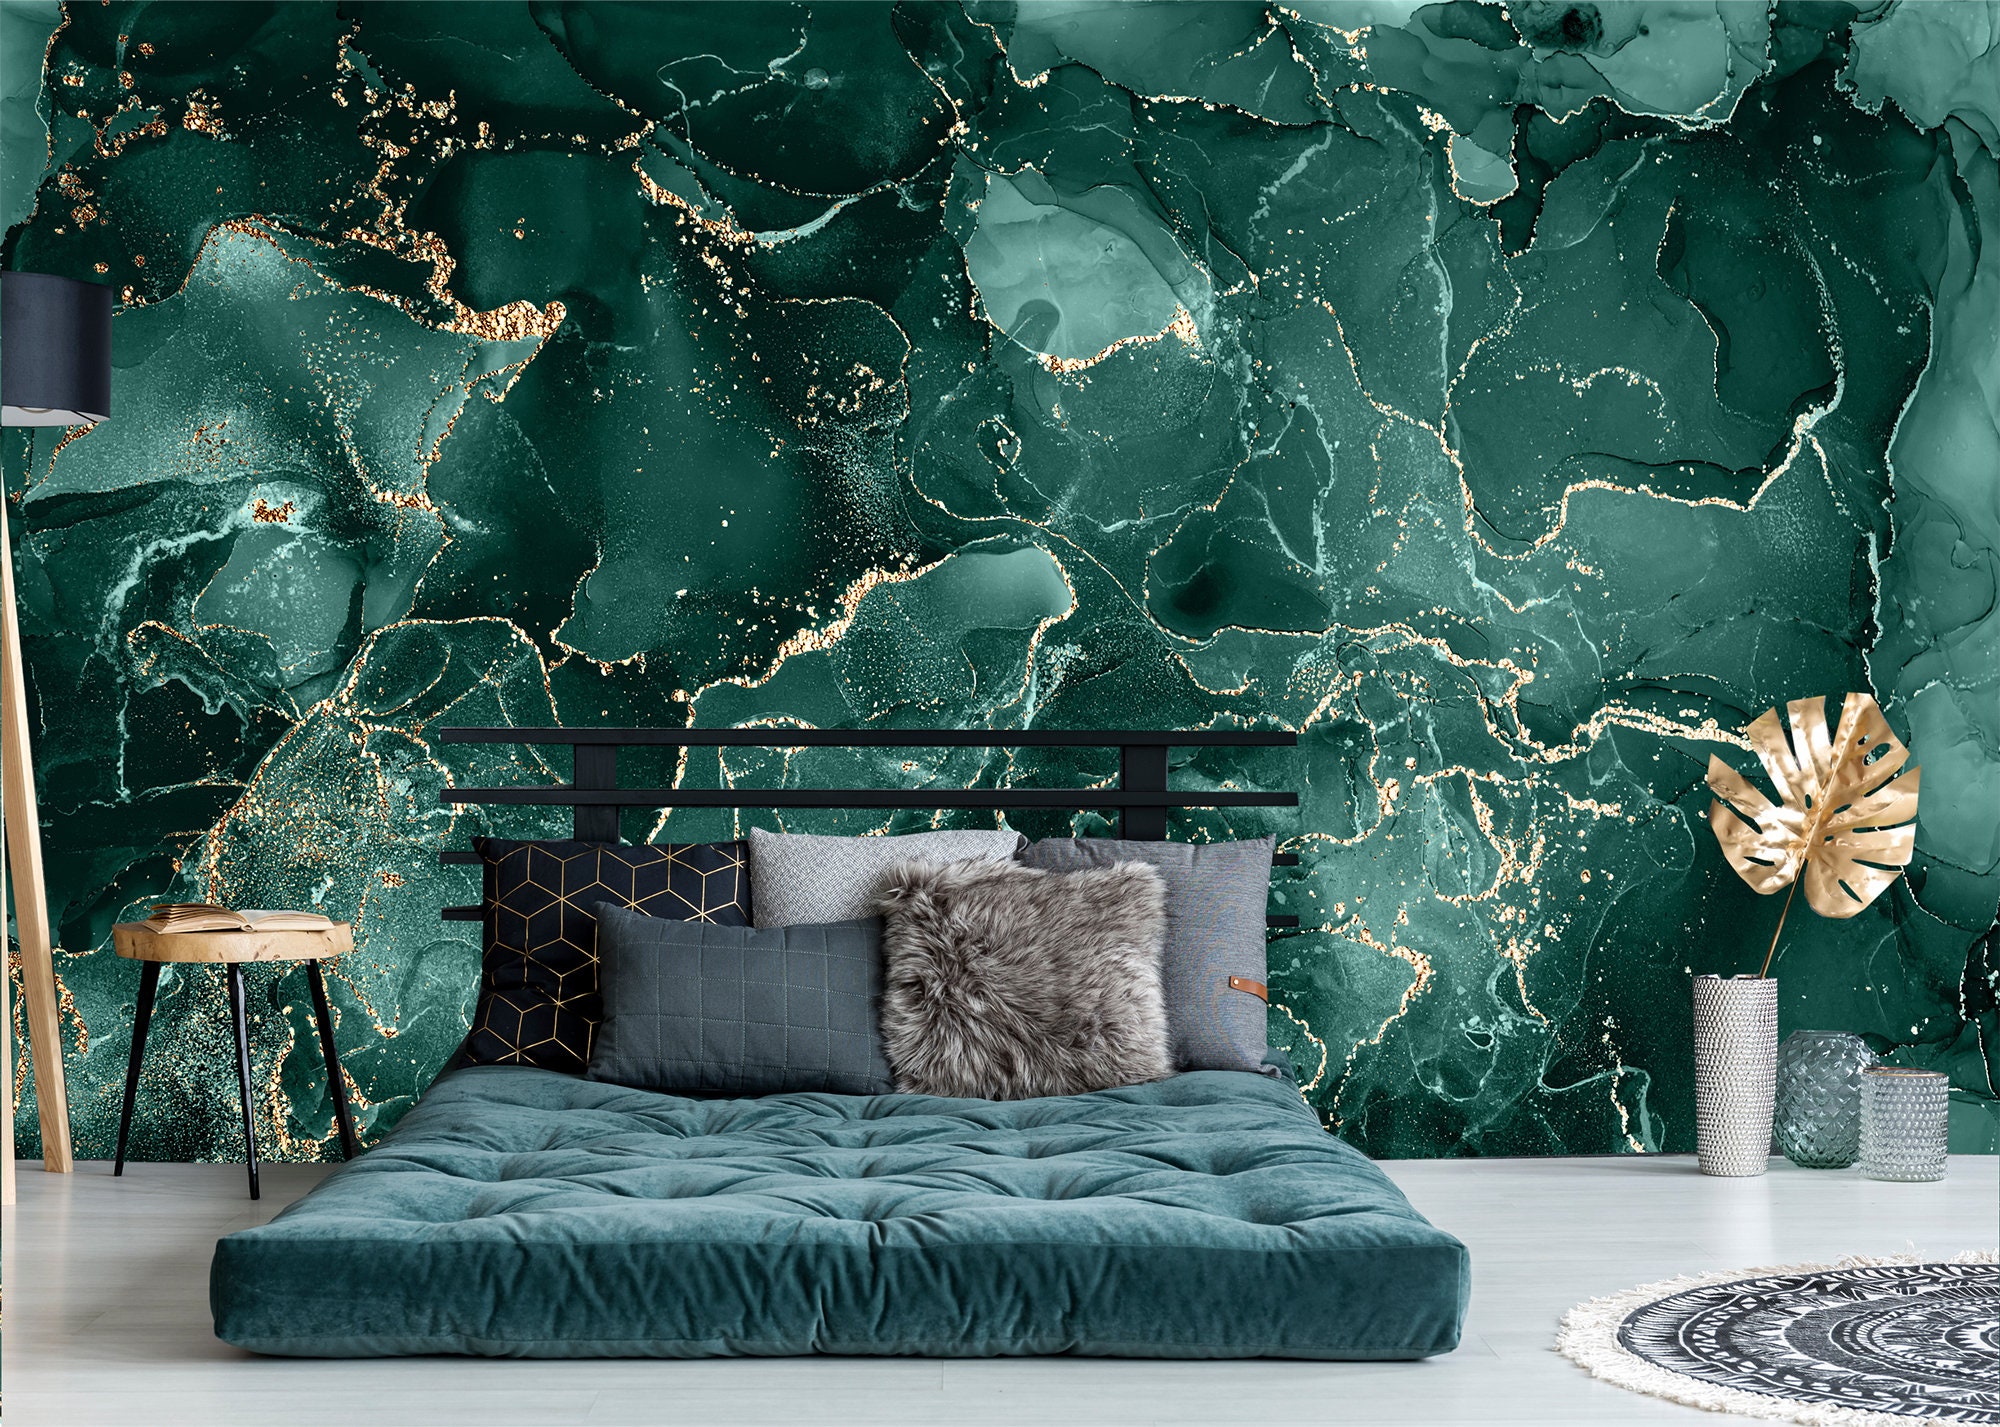 Dark Teal and Gold Wallpaper  Luxury Mosaic Design  Happywall